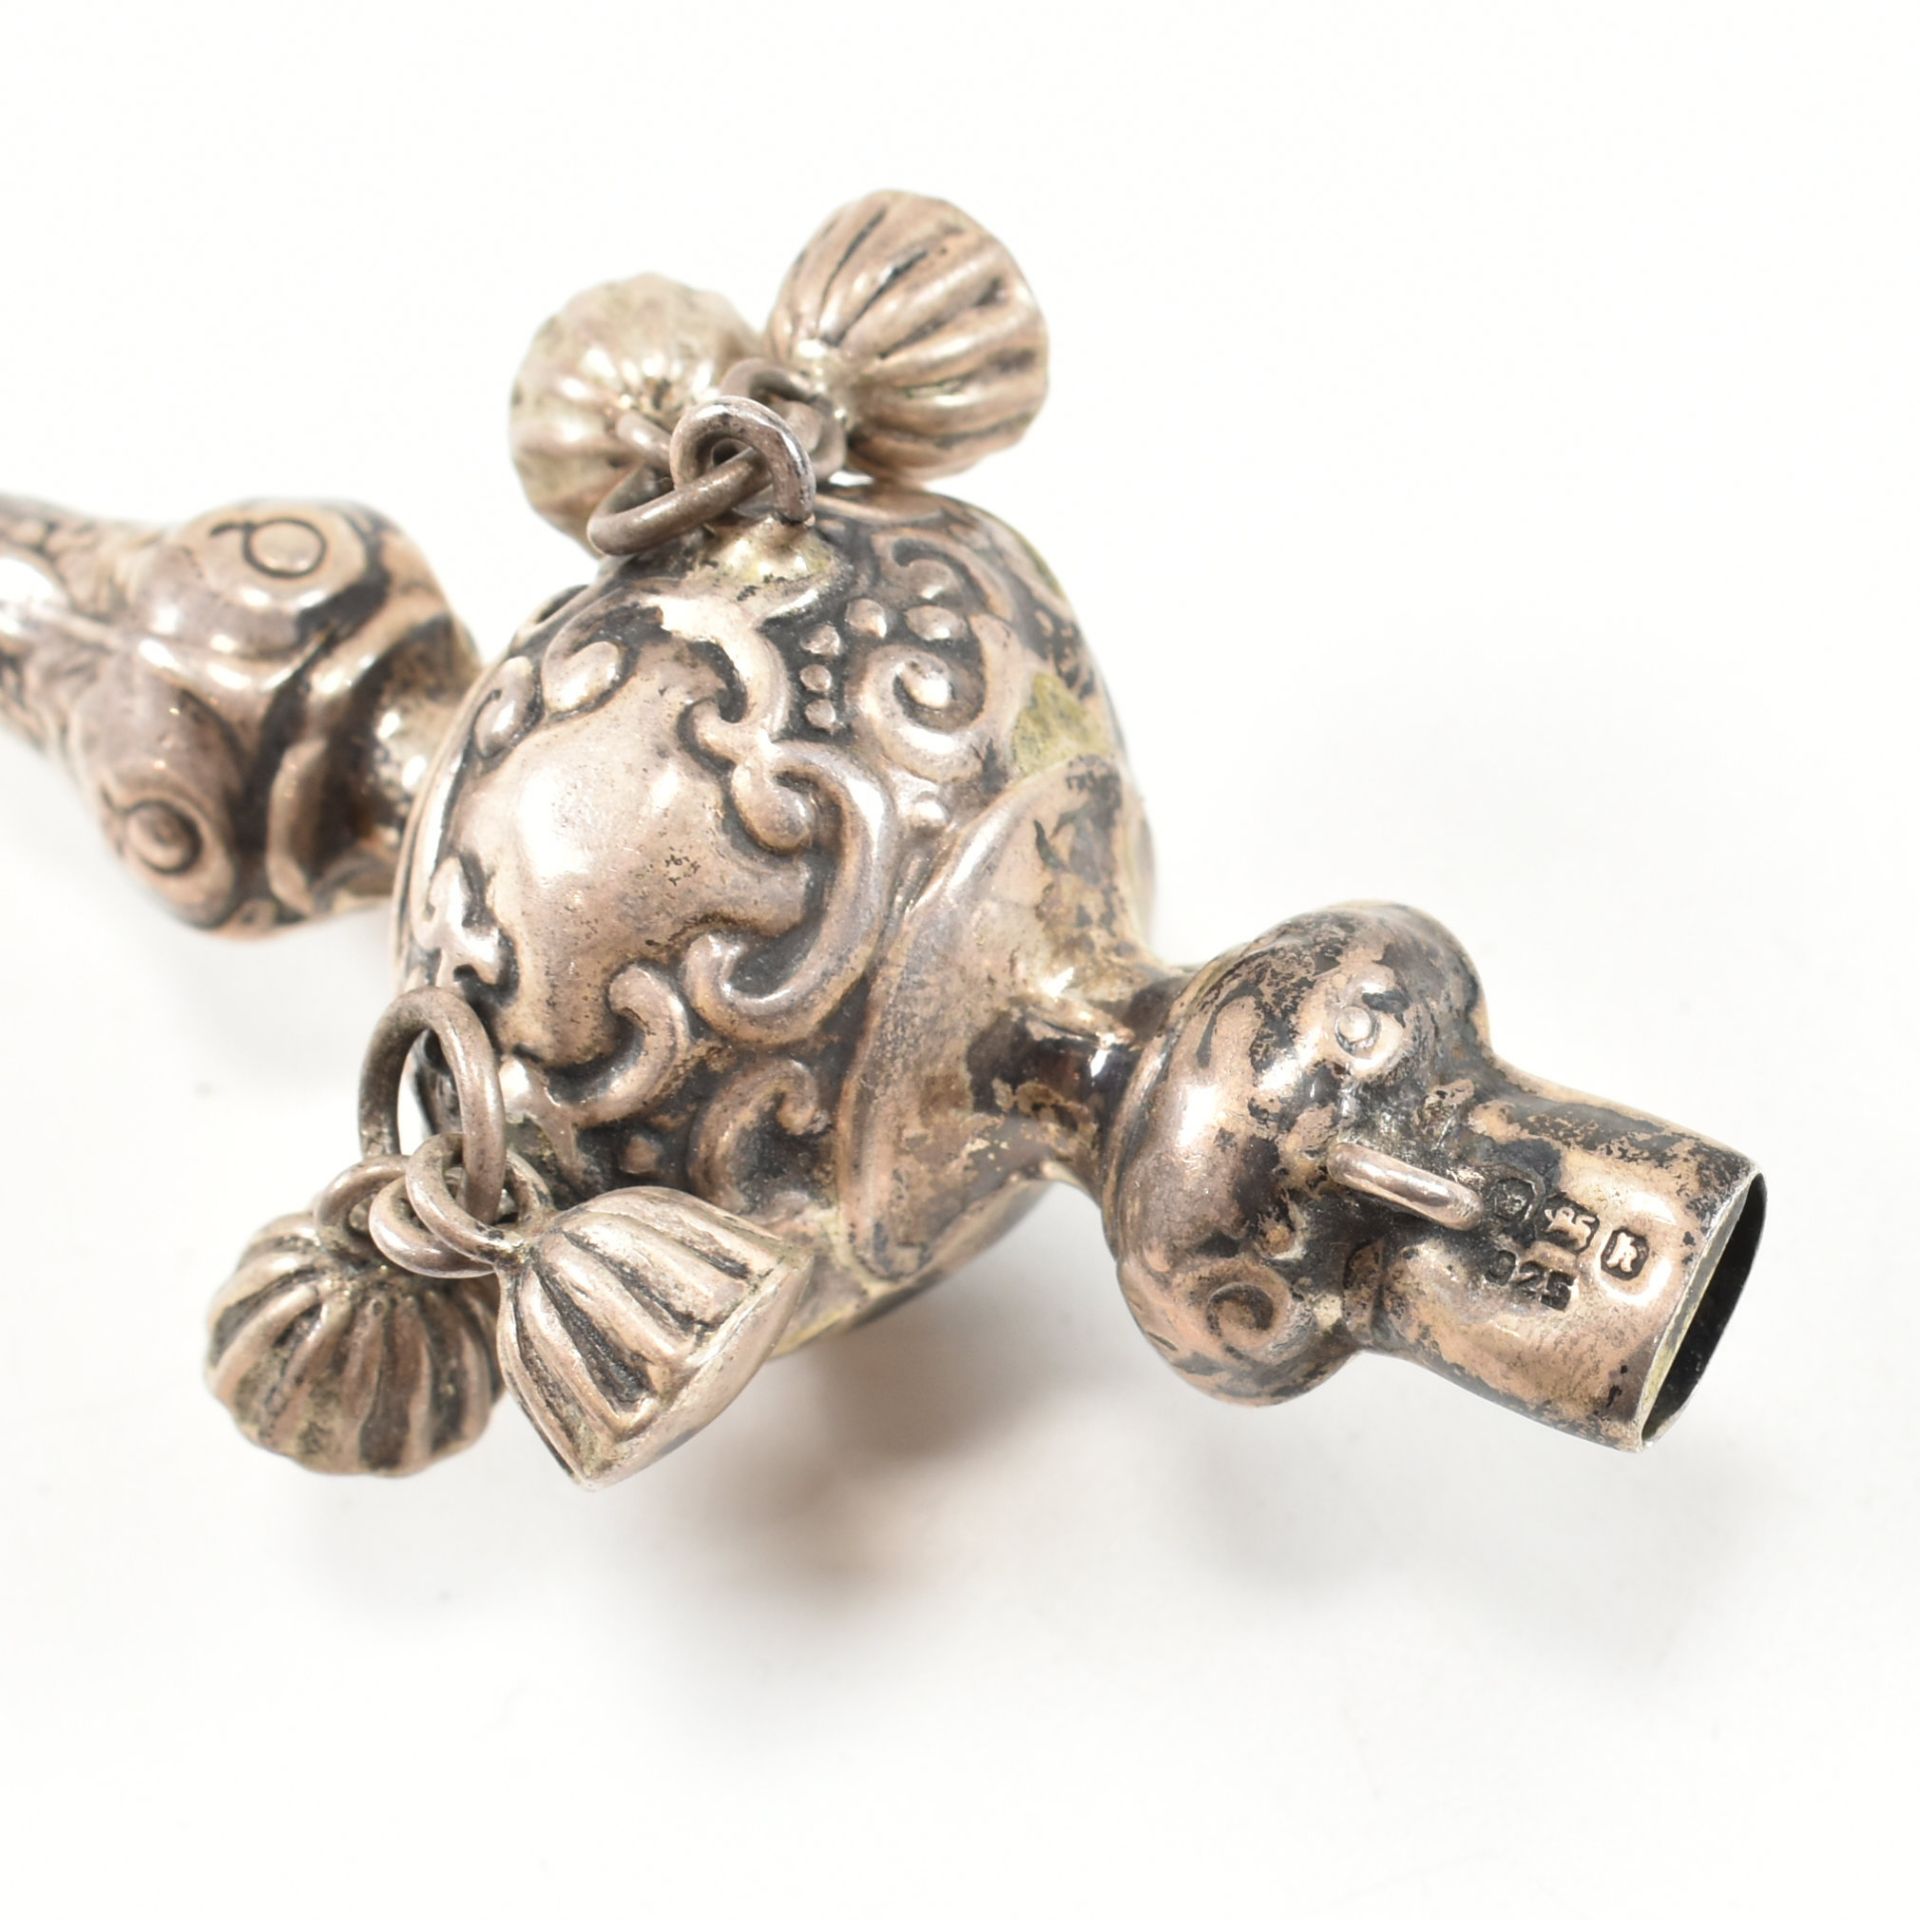 EDWARDIAN HALLMARKED SILVER & MOP BABYS RATTLE WHISTLE - Image 2 of 6